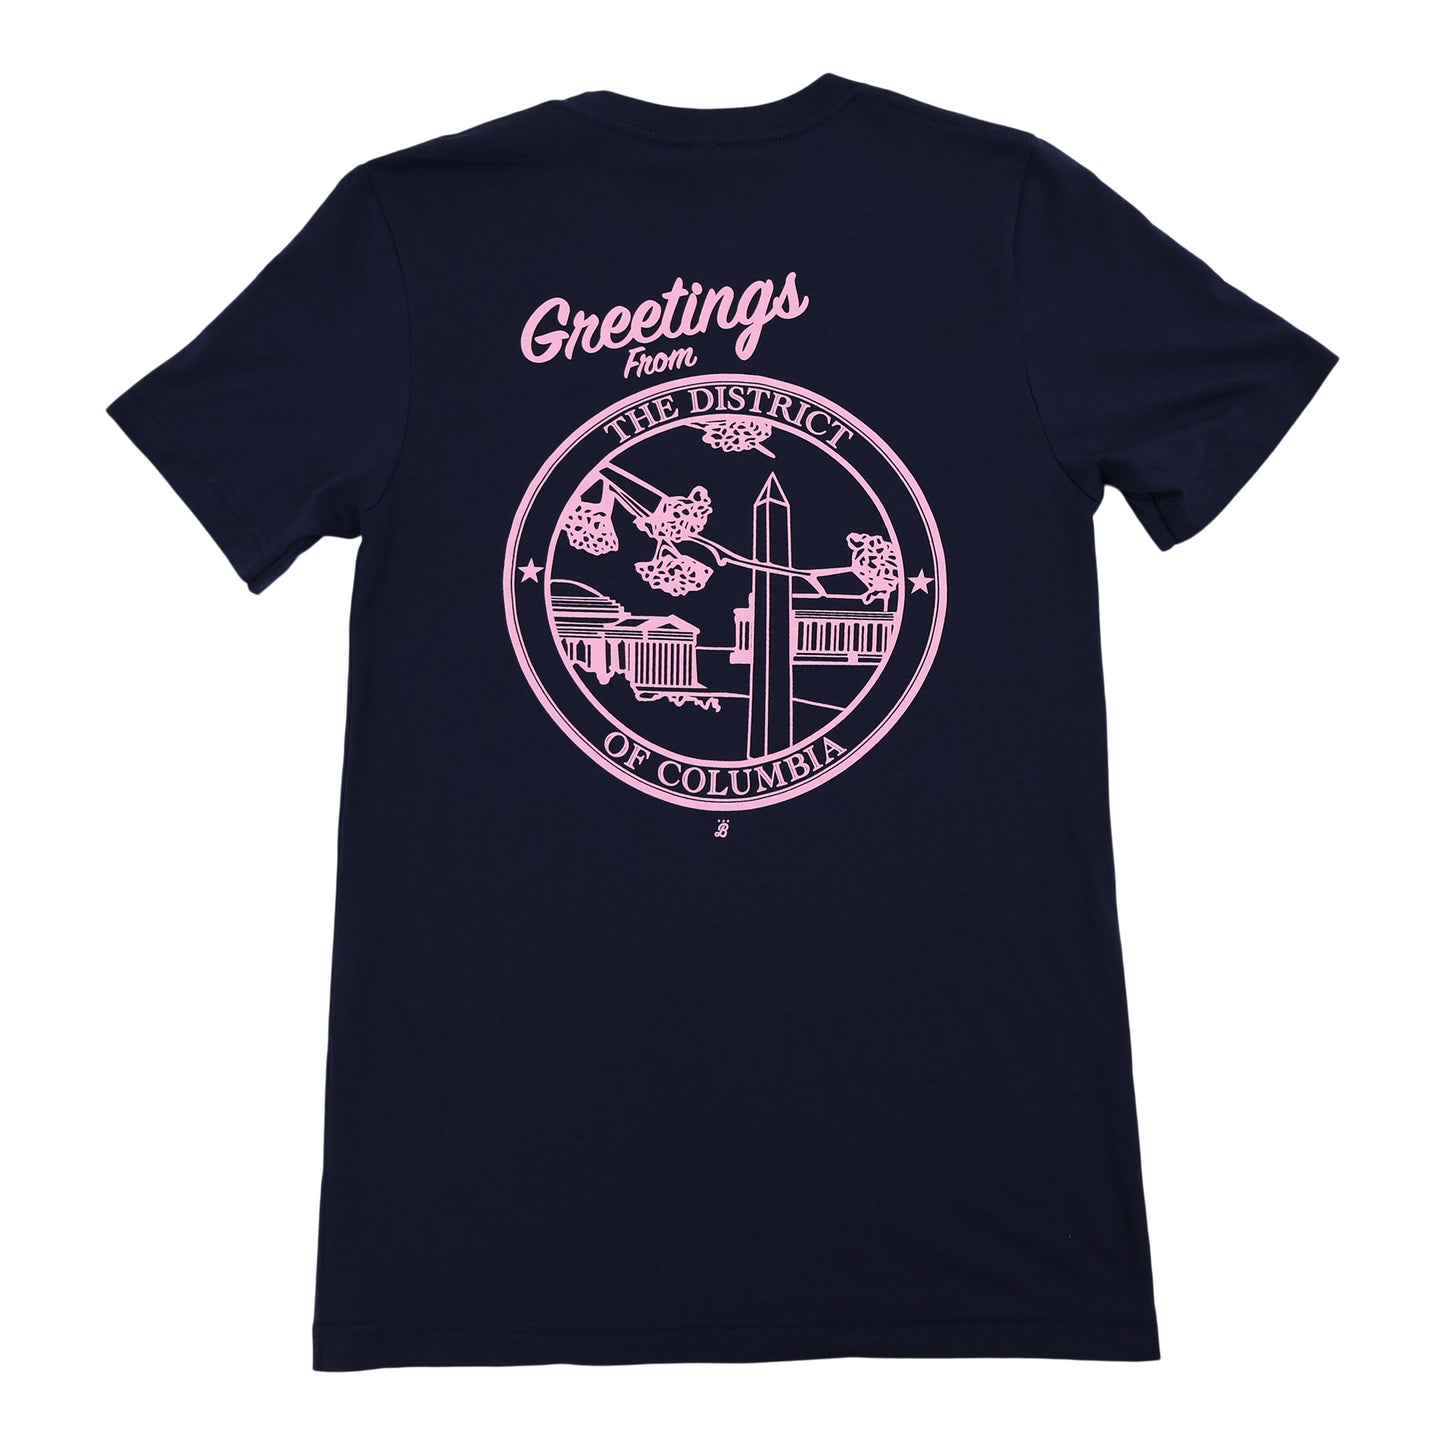 Unisex 'Greetings from DC' double-sided t-shirt